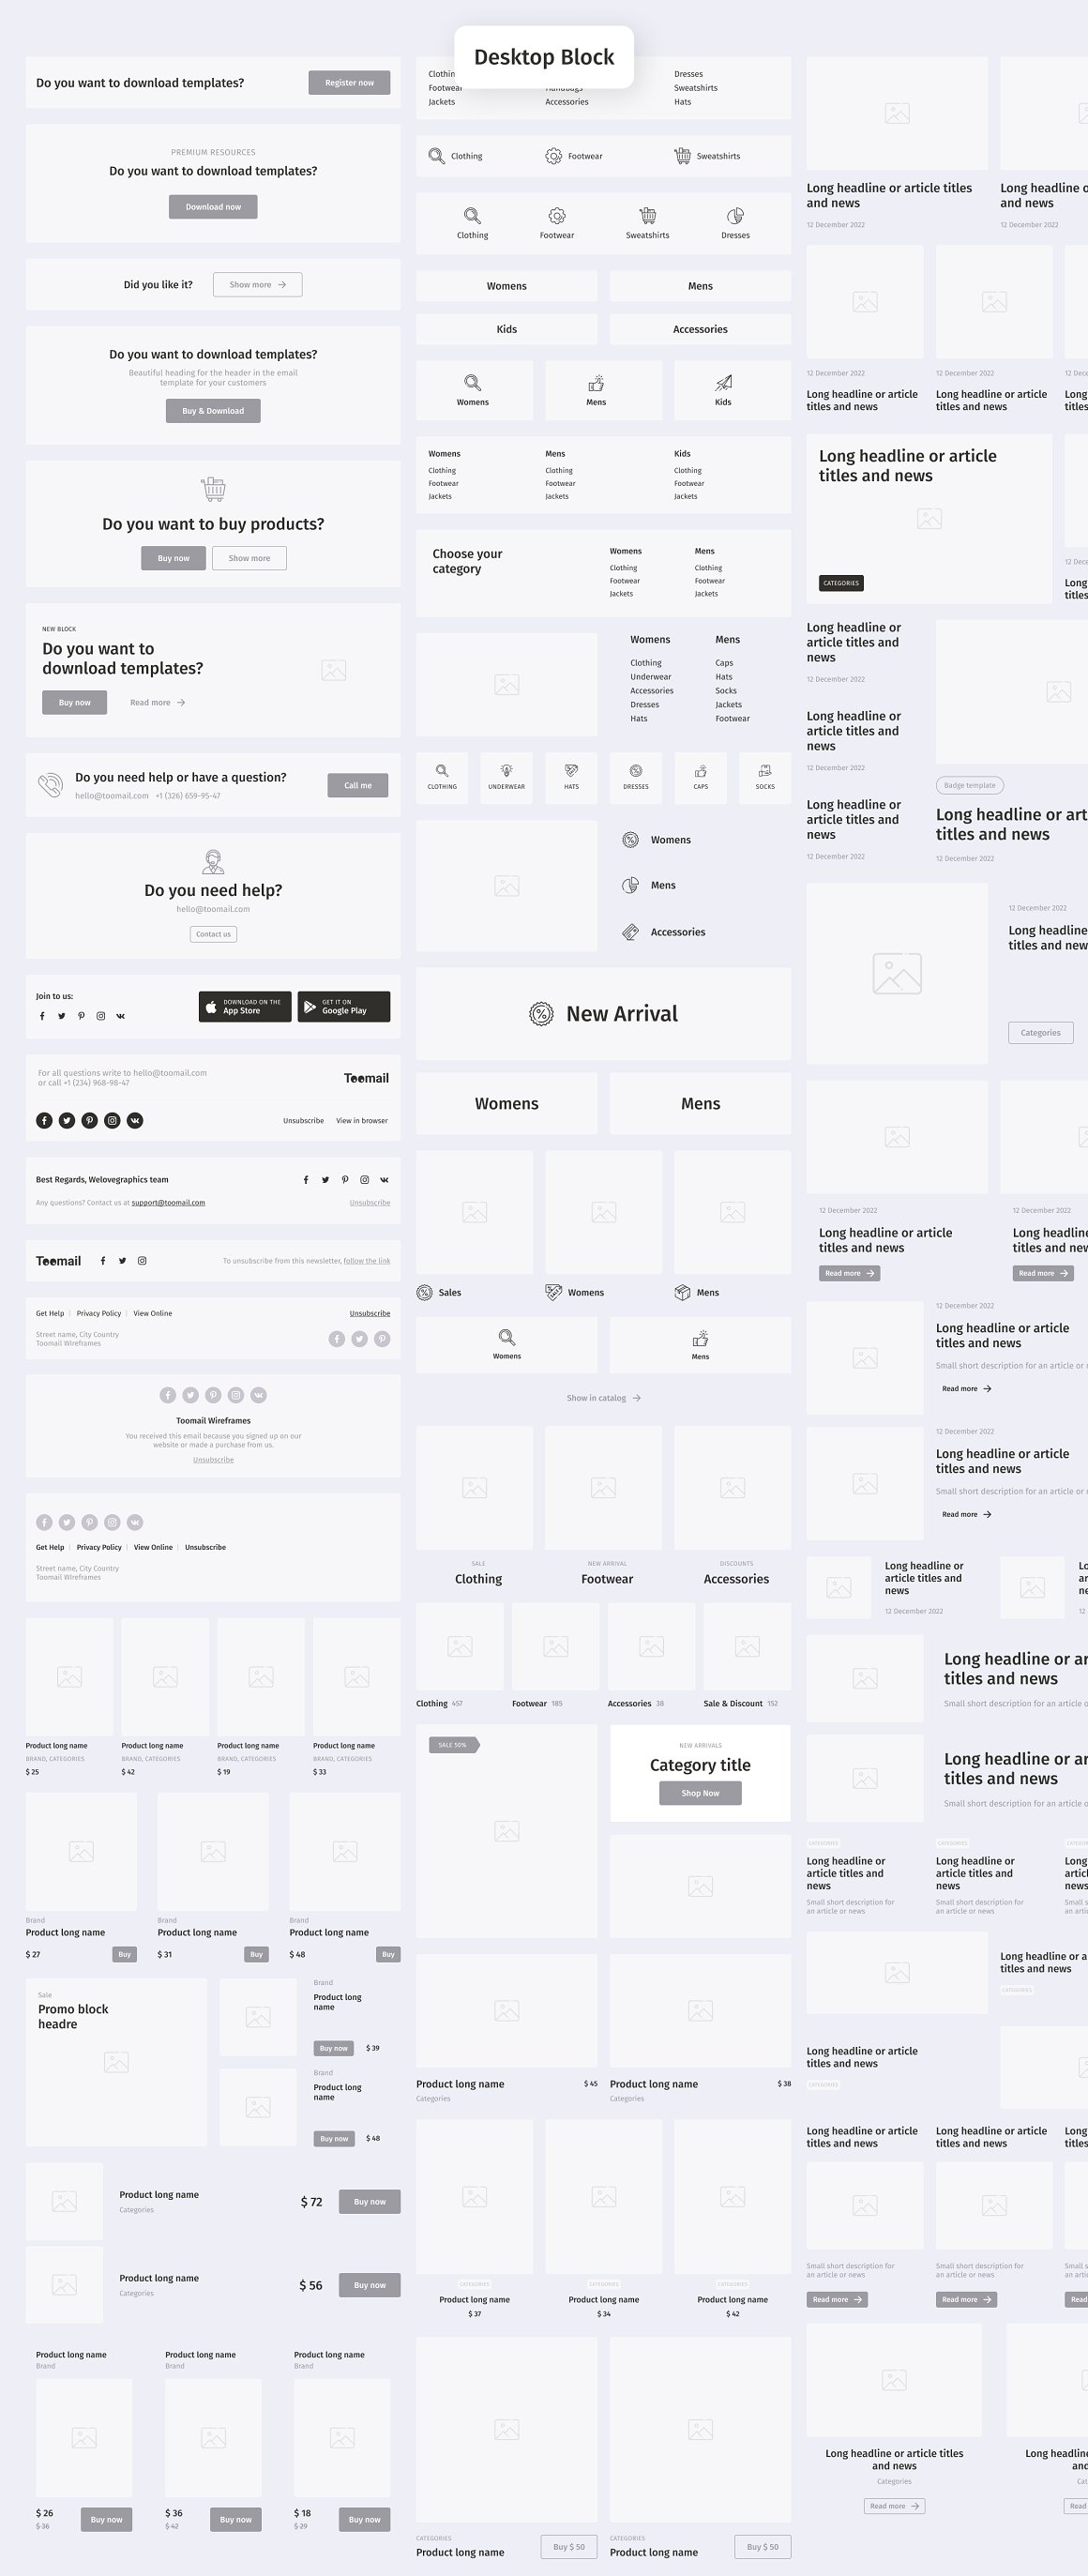 An image of a universal wireframe email newsletter.